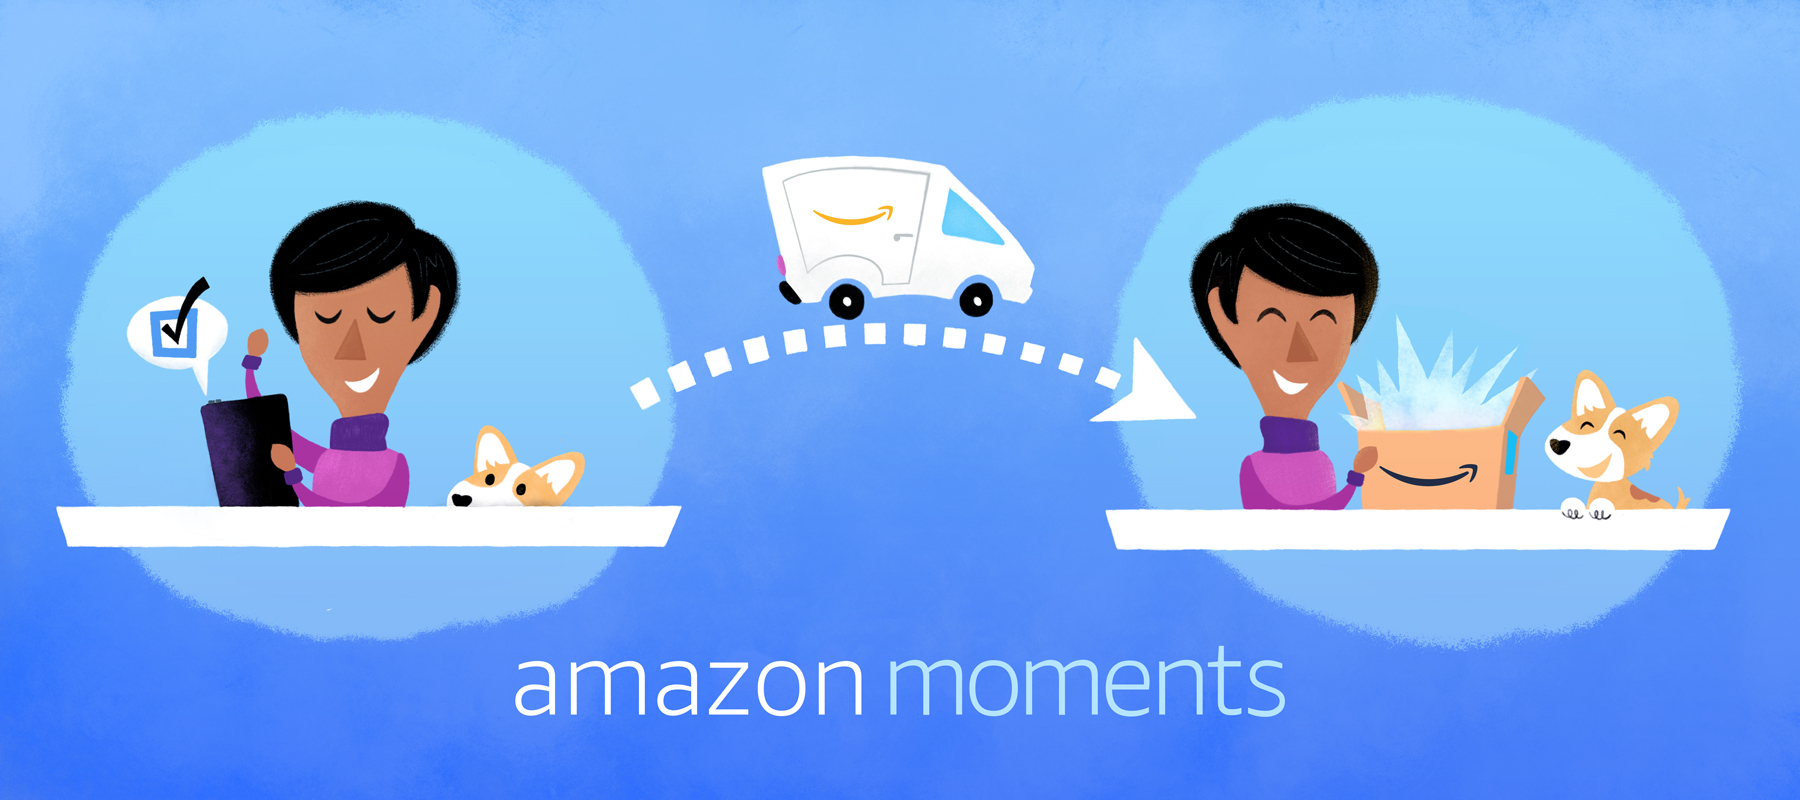 Seamless Amazon Moments reward process, from online shopping to joyful product unboxing with a pet by the side.